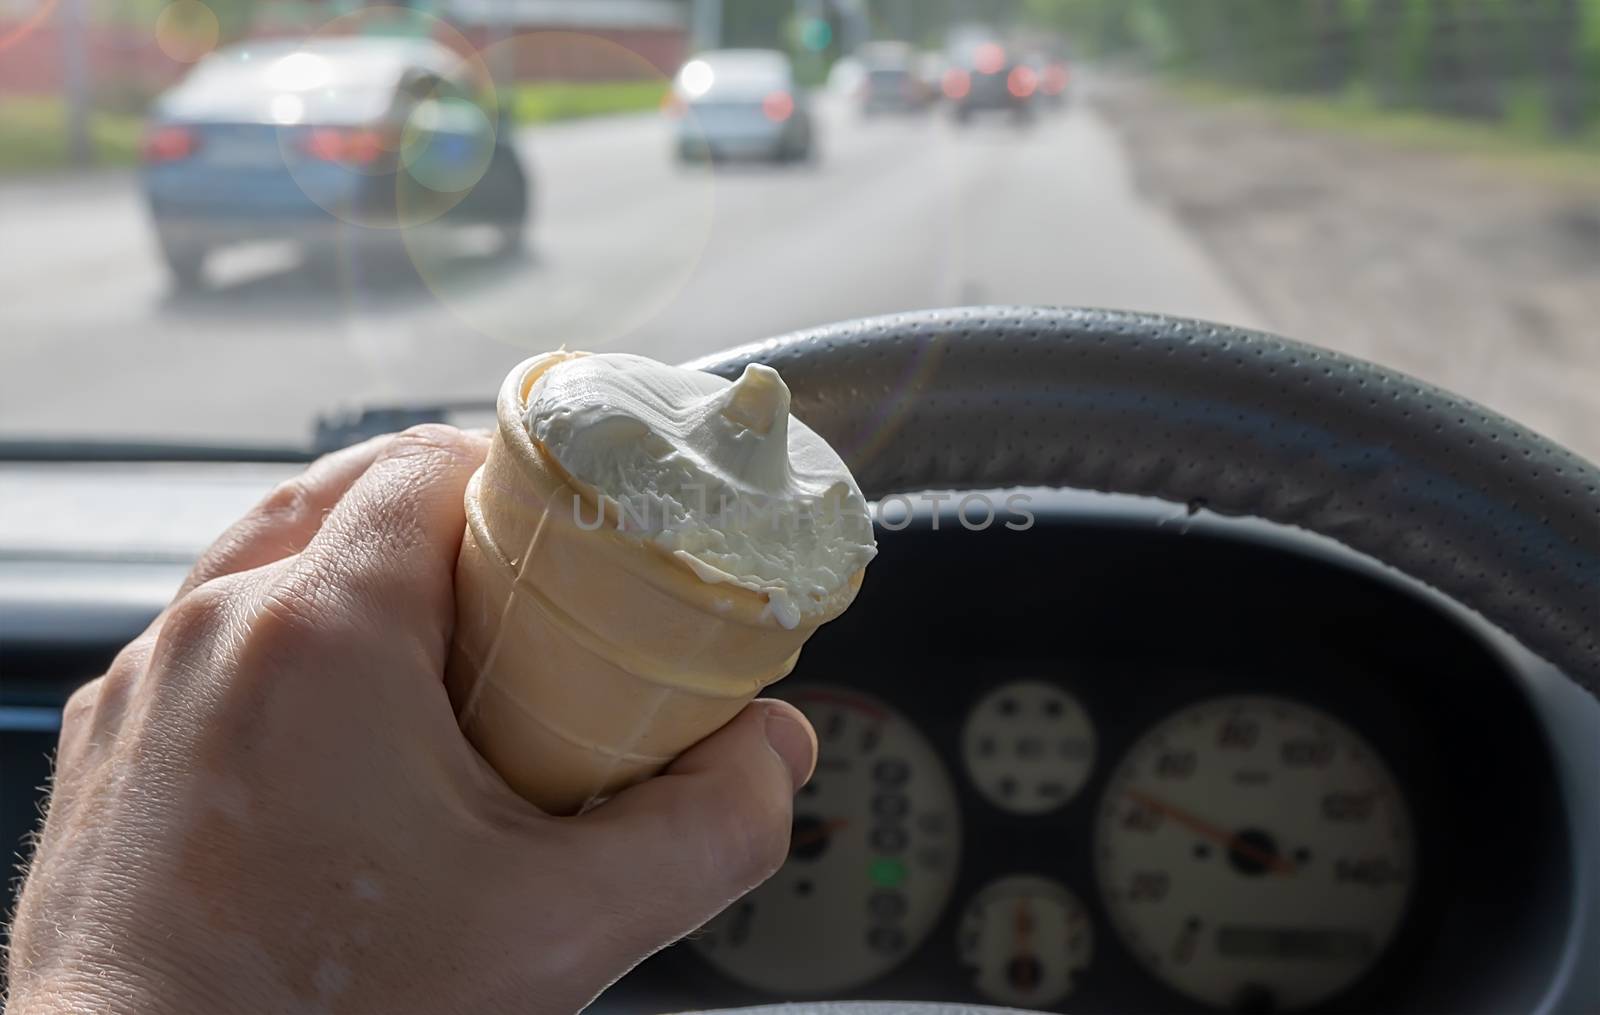 ice cream in the hand of the driver of the car by jk3030